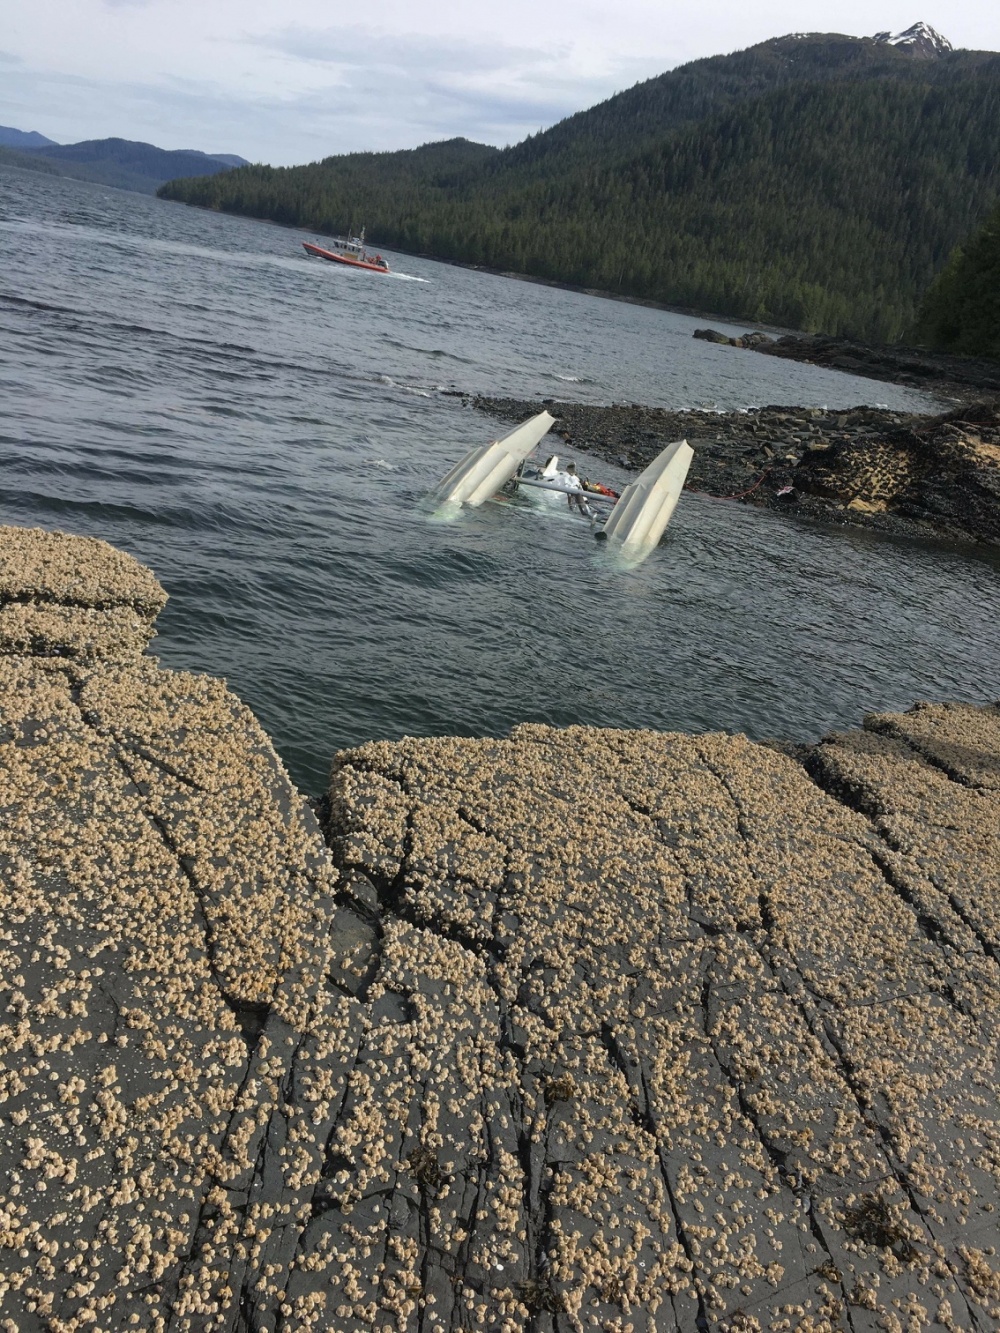 The scene of a fatal float plane crash that left at least four people dead and two unaccounted for near Ketchikan, Alaska, on May 13, 2019.